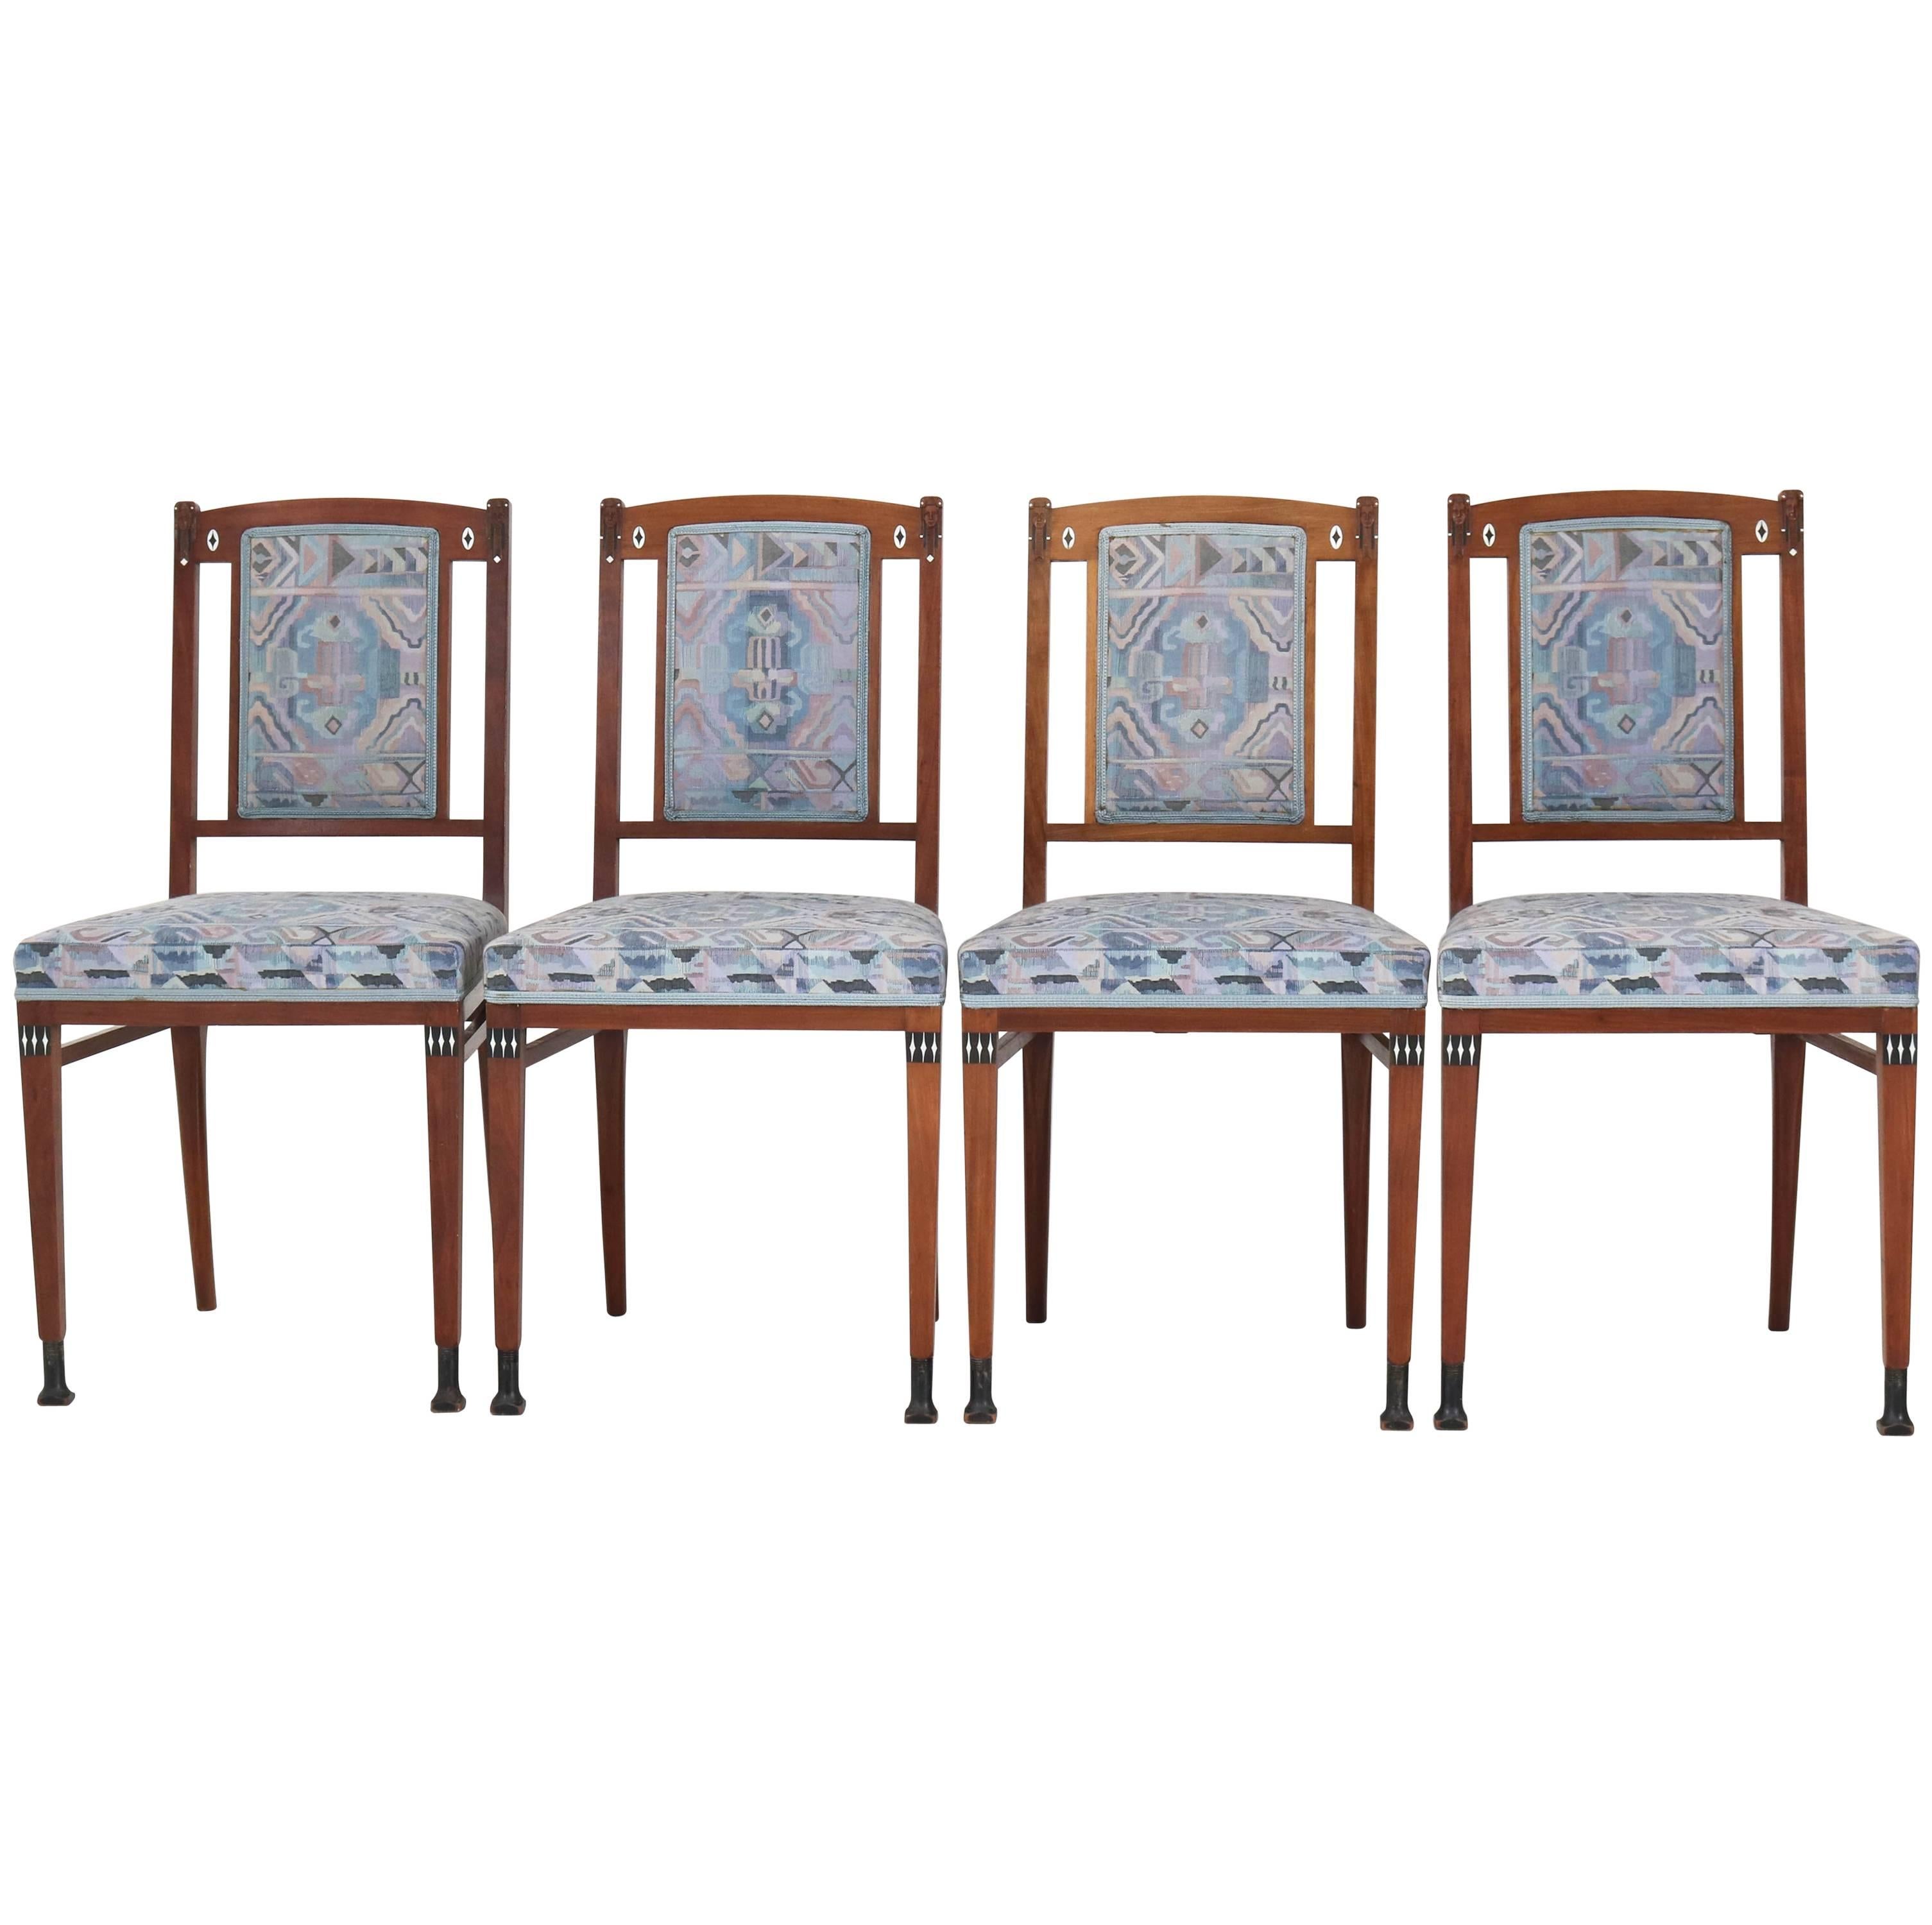 Four Mahogany Dutch Art Nouveau Chairs by J.M. Middelraad for Pander, 1900s